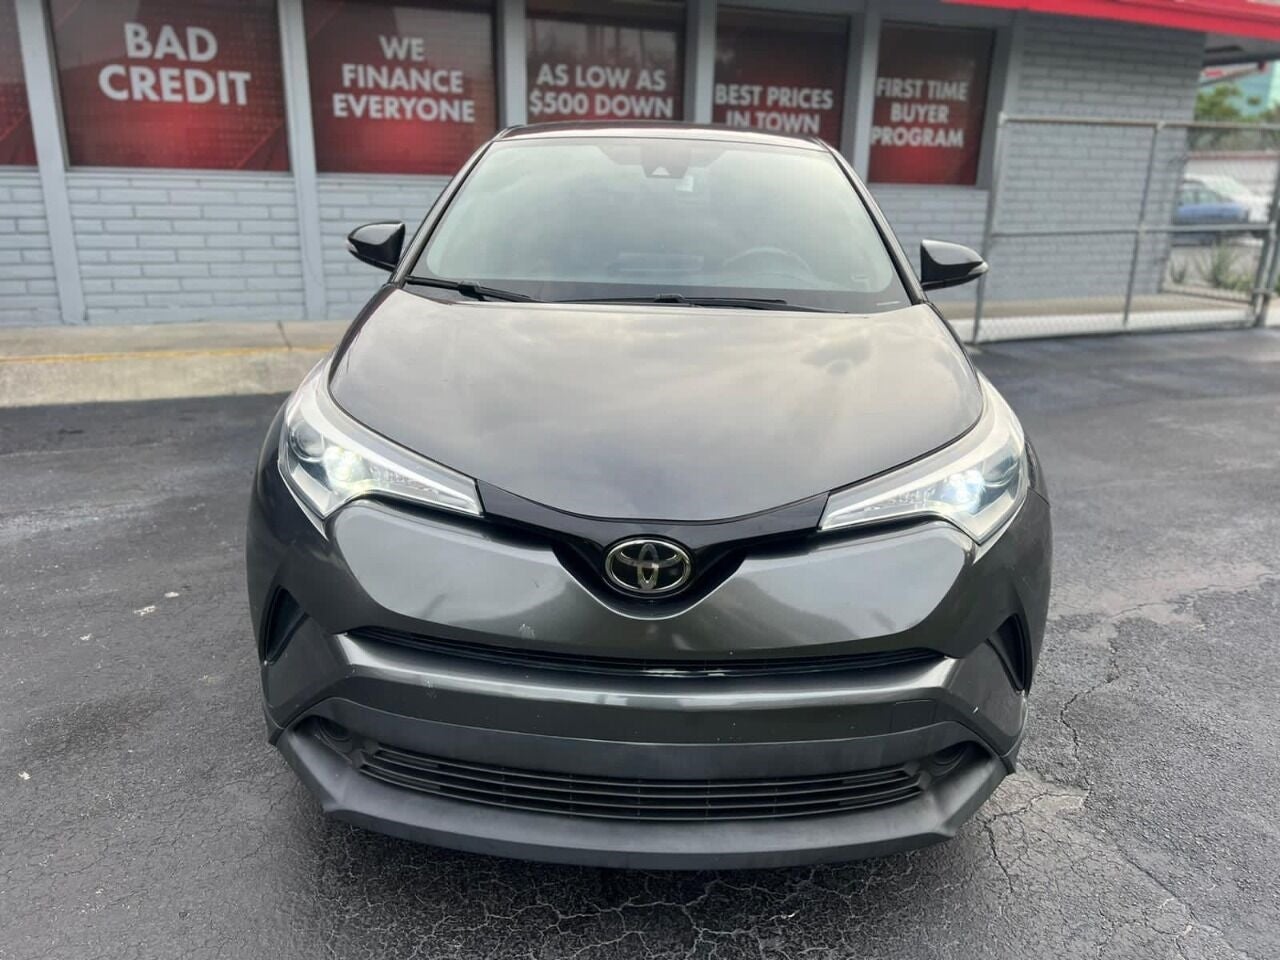 2018 Toyota C-HR XLE 4dr Crossover